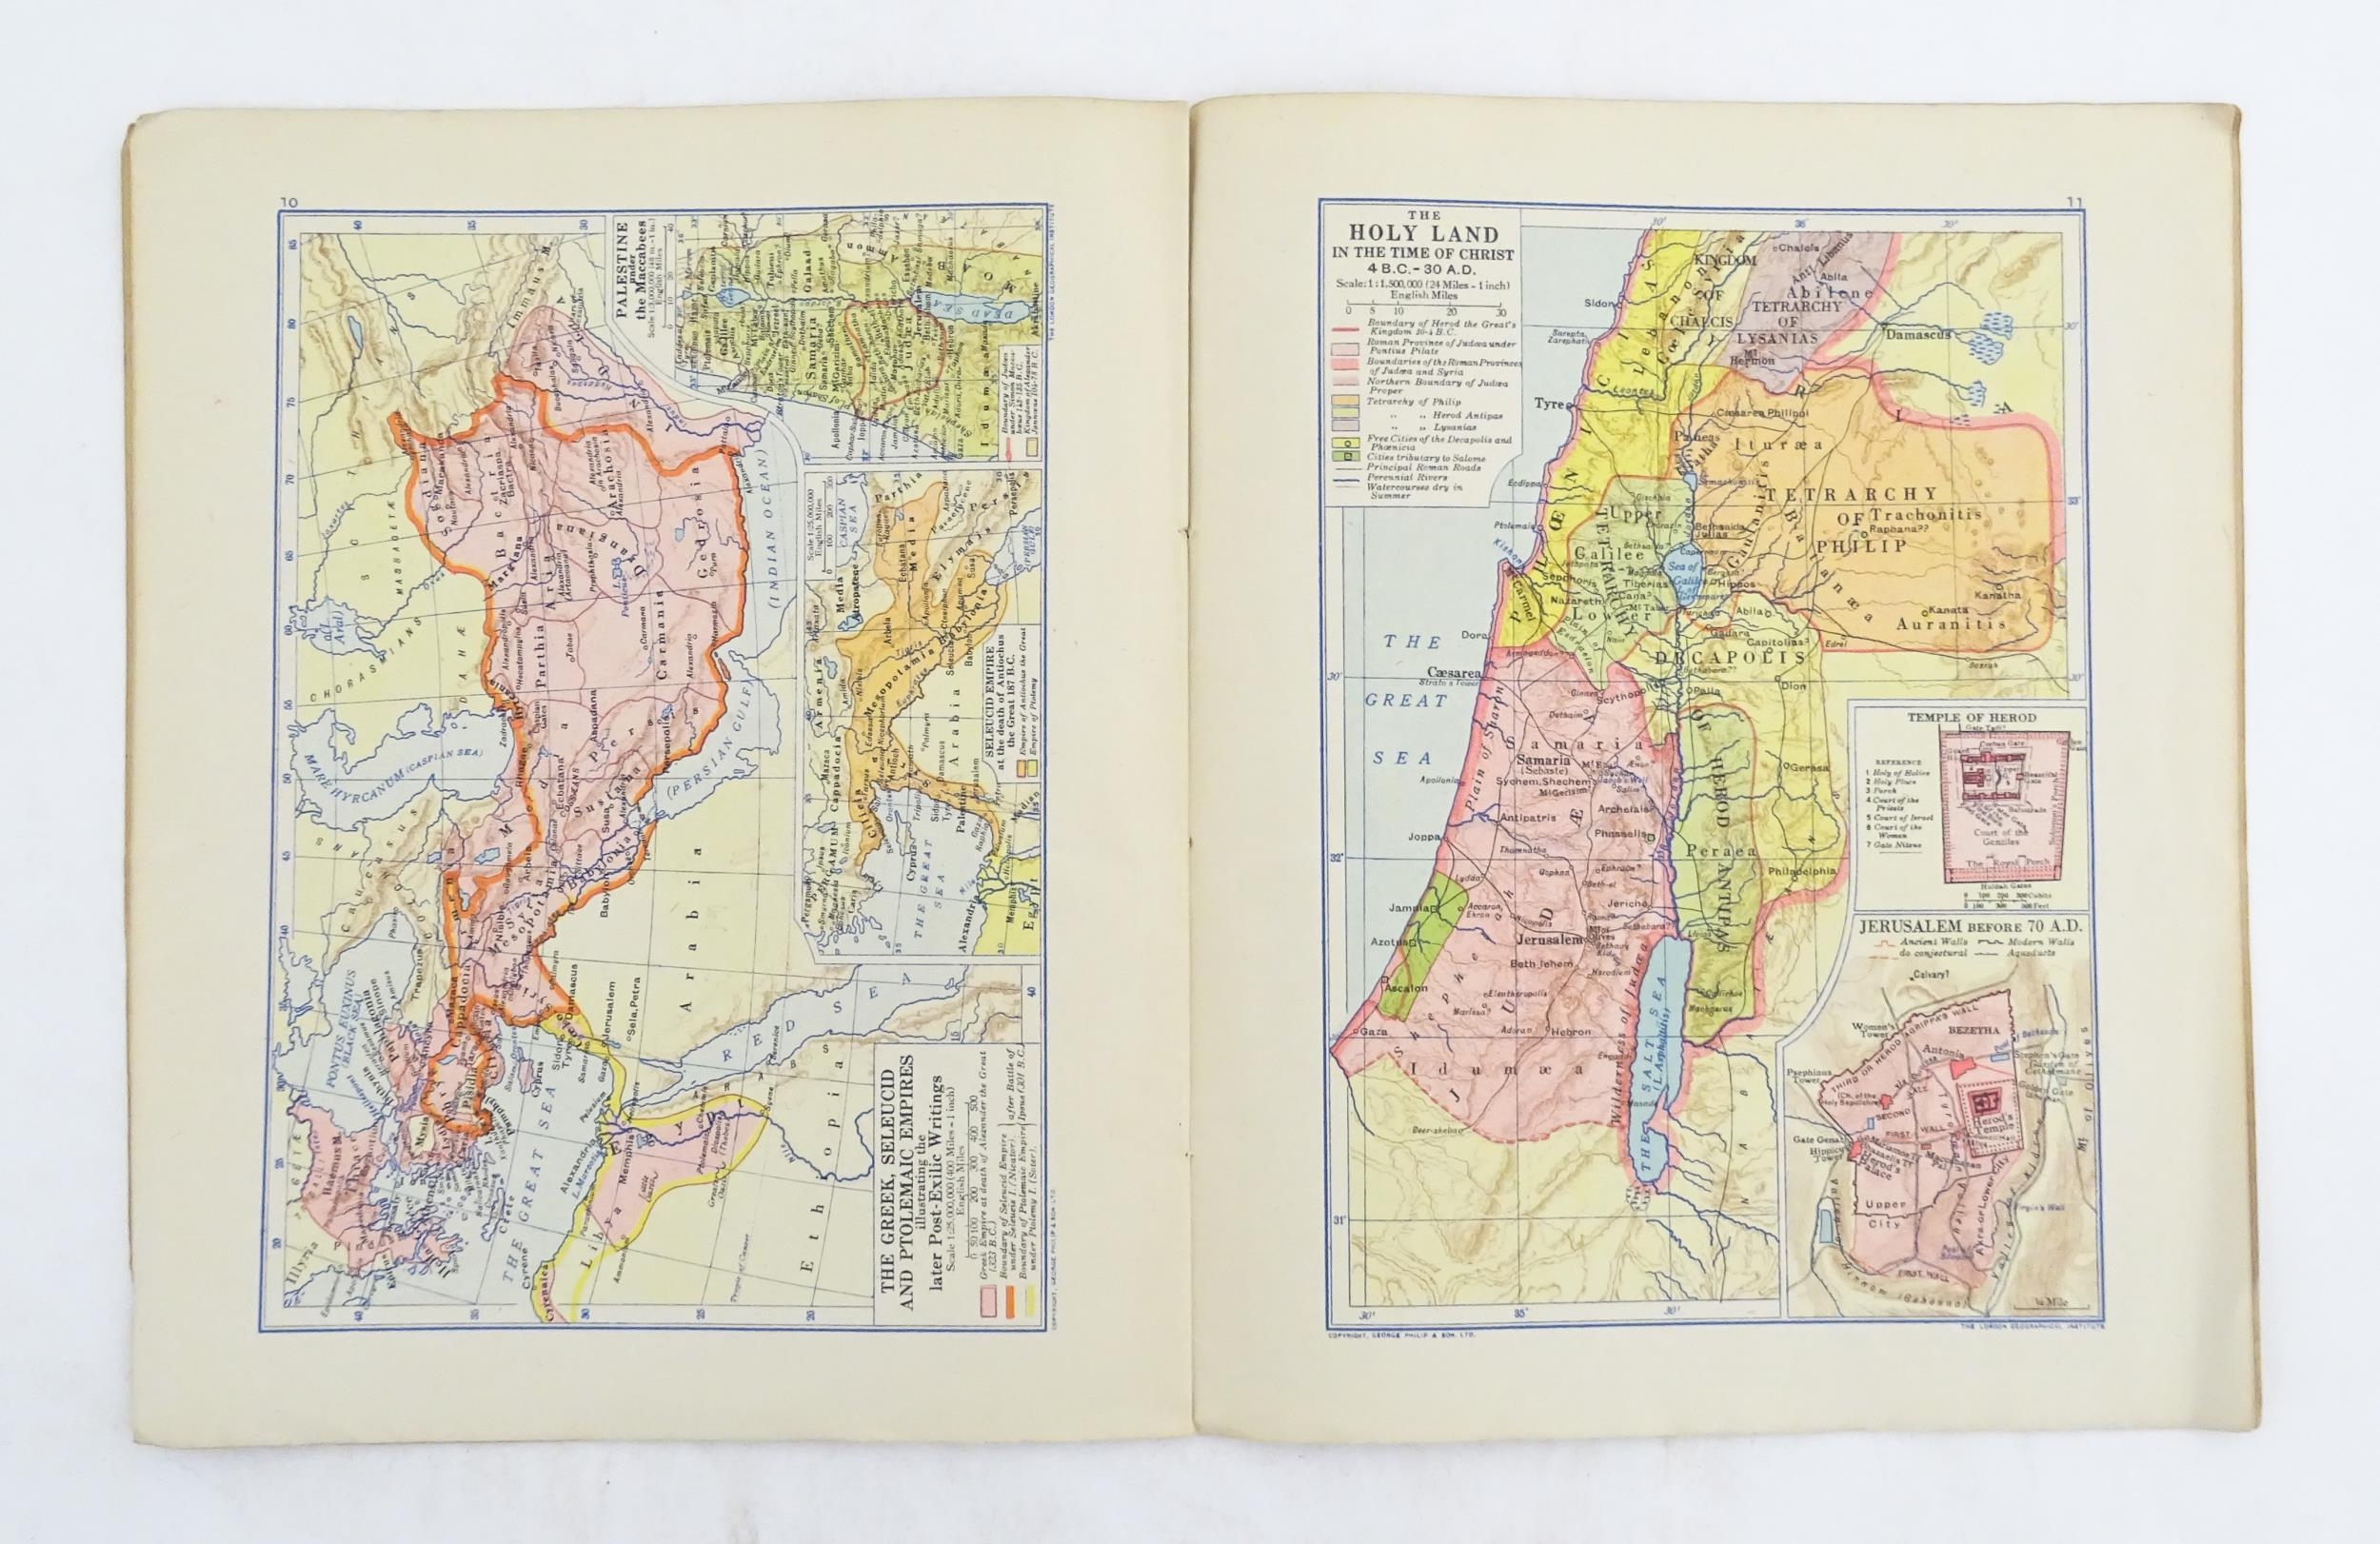 Maps: Philips' New Scripture Atlas, to include maps and plans illustrating the historical - Image 5 of 7